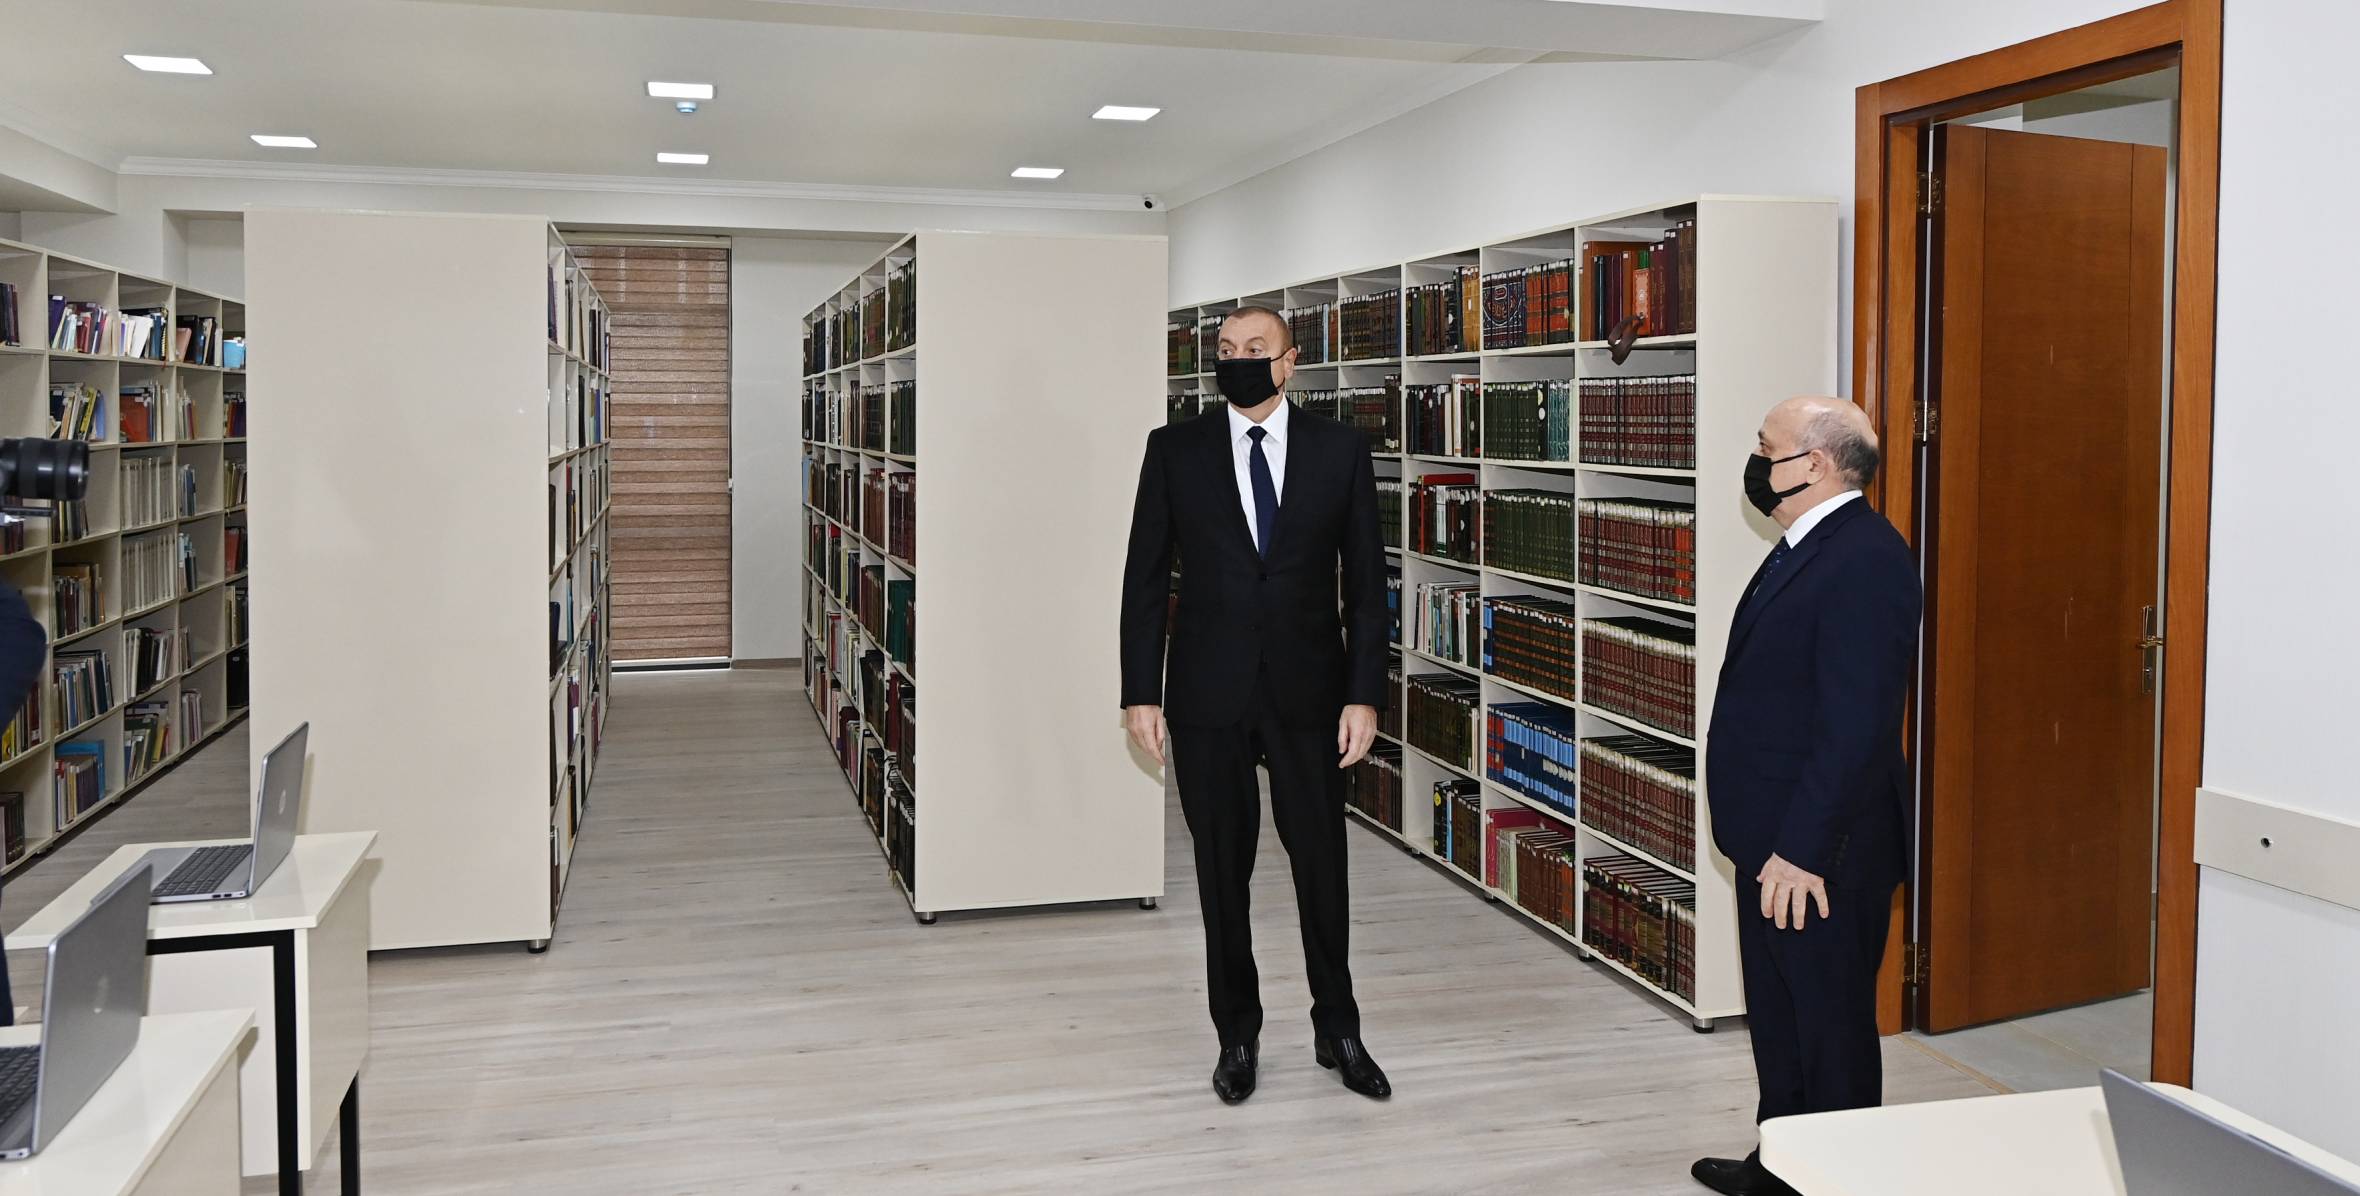 Ilham Aliyev inaugurated the new administrative building of the Institute of Theology